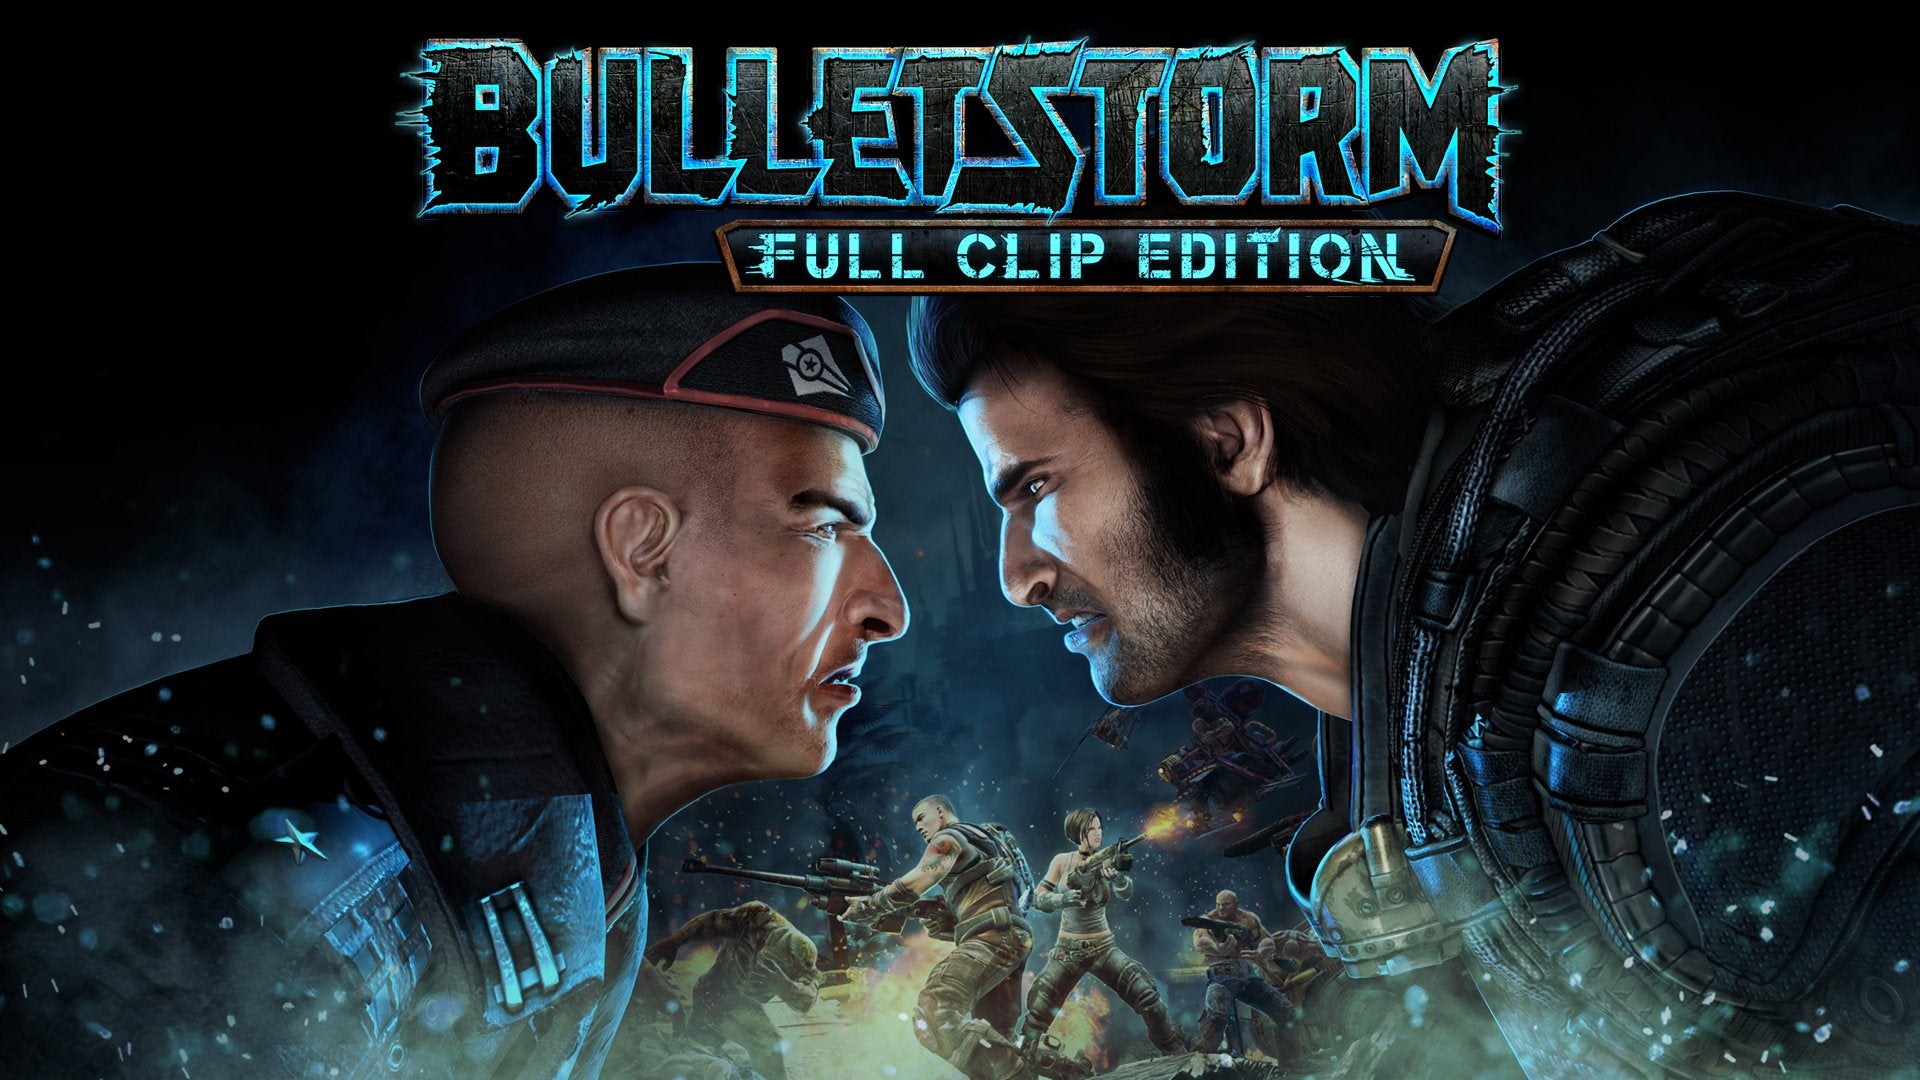 Image for Watch the new Bulletstorm: Full Clip Edition story trailer and 4K gameplay